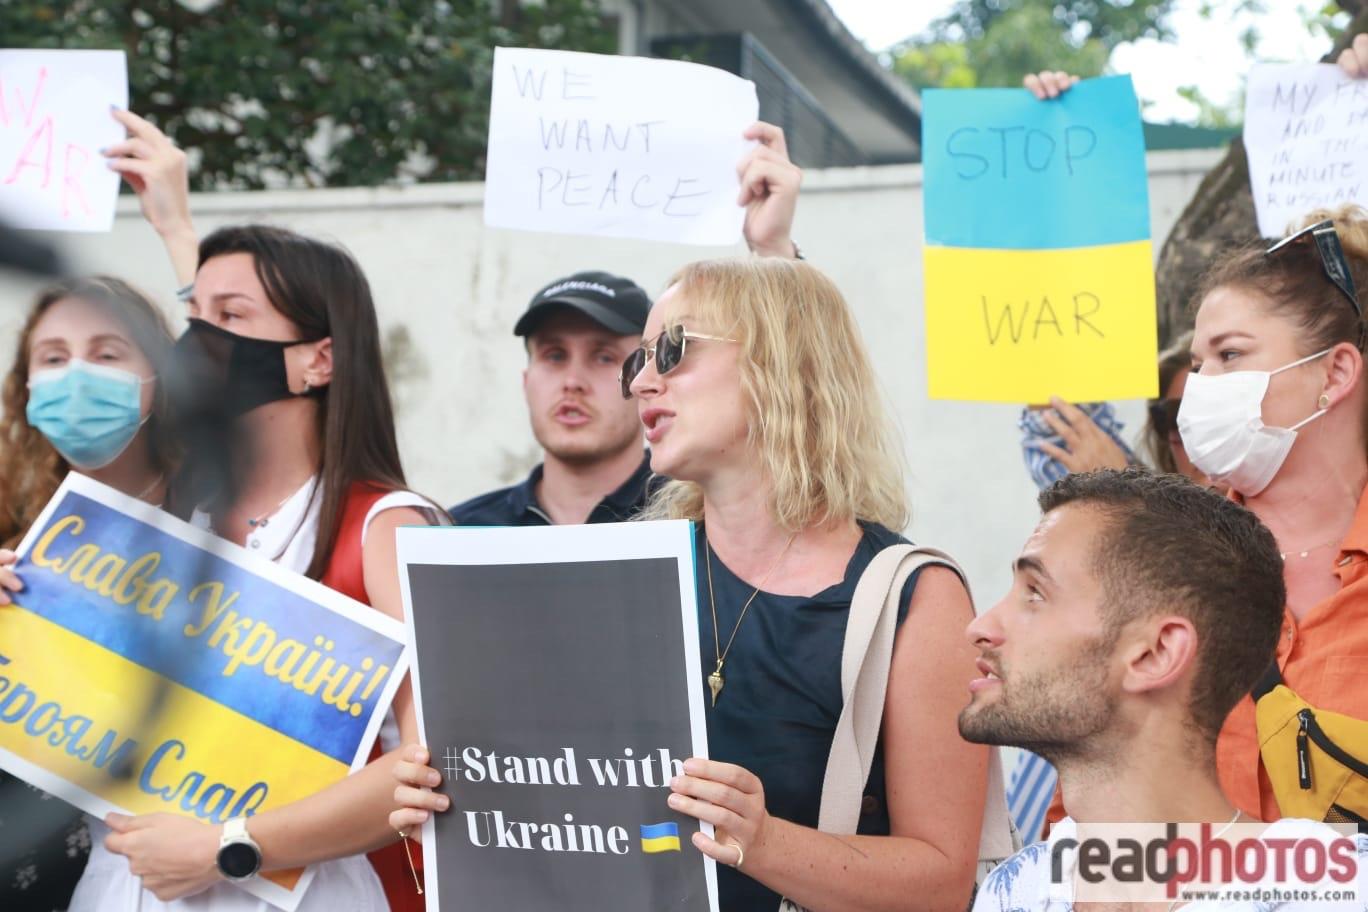 Stop Putin - Ukrainians in SL protest in front of the Russian Embassy in Colombo - Read Photos